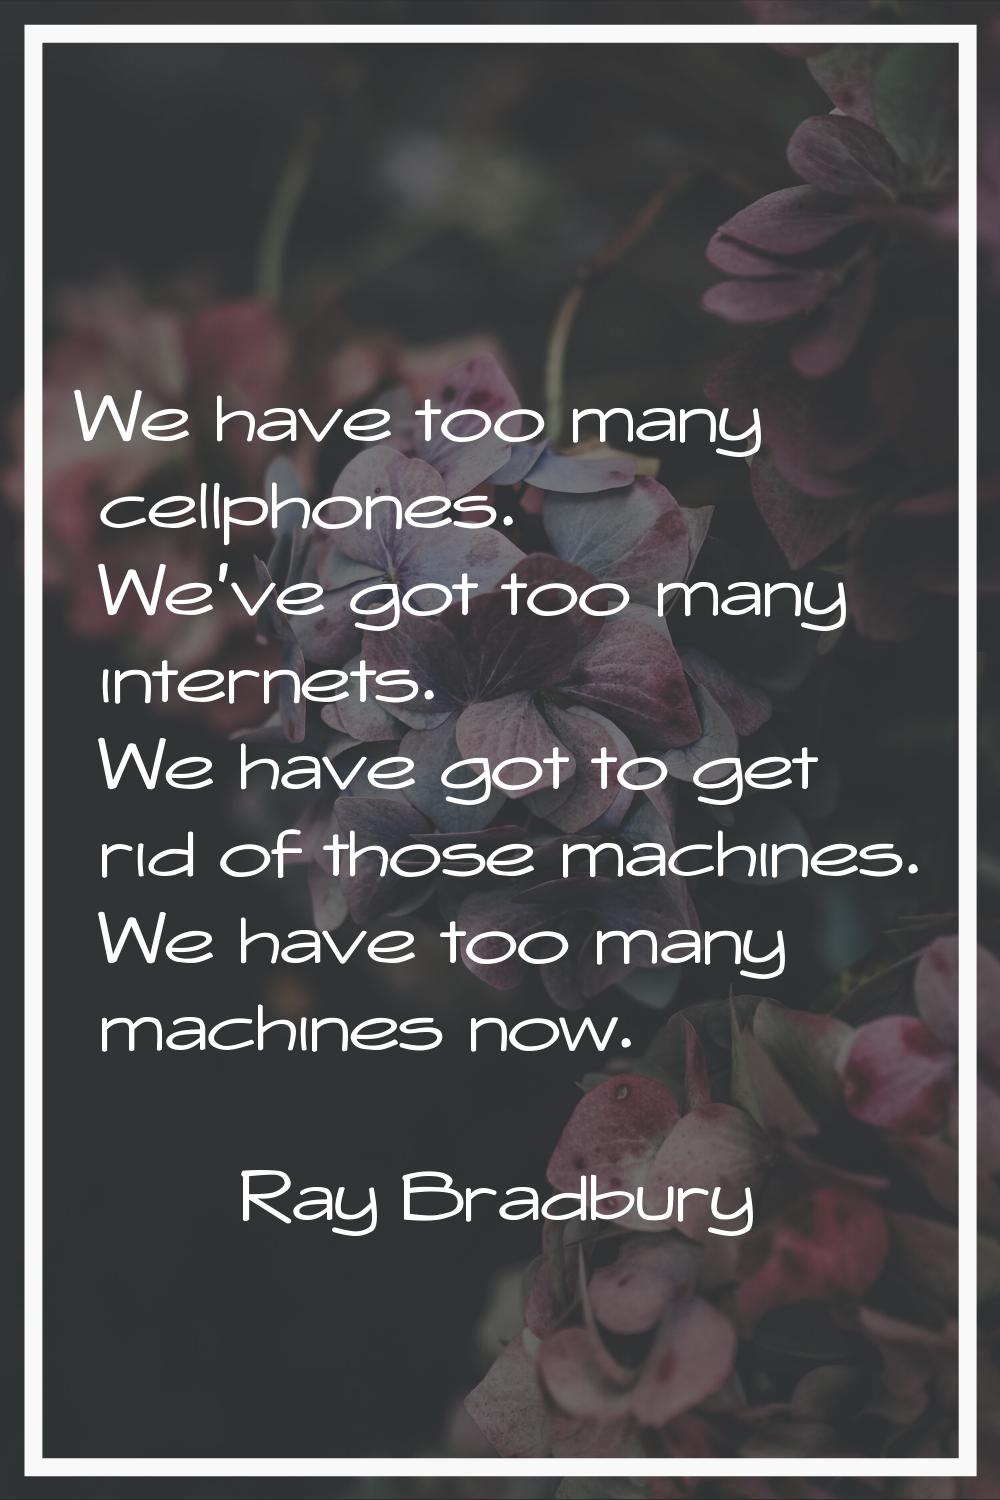 We have too many cellphones. We've got too many internets. We have got to get rid of those machines